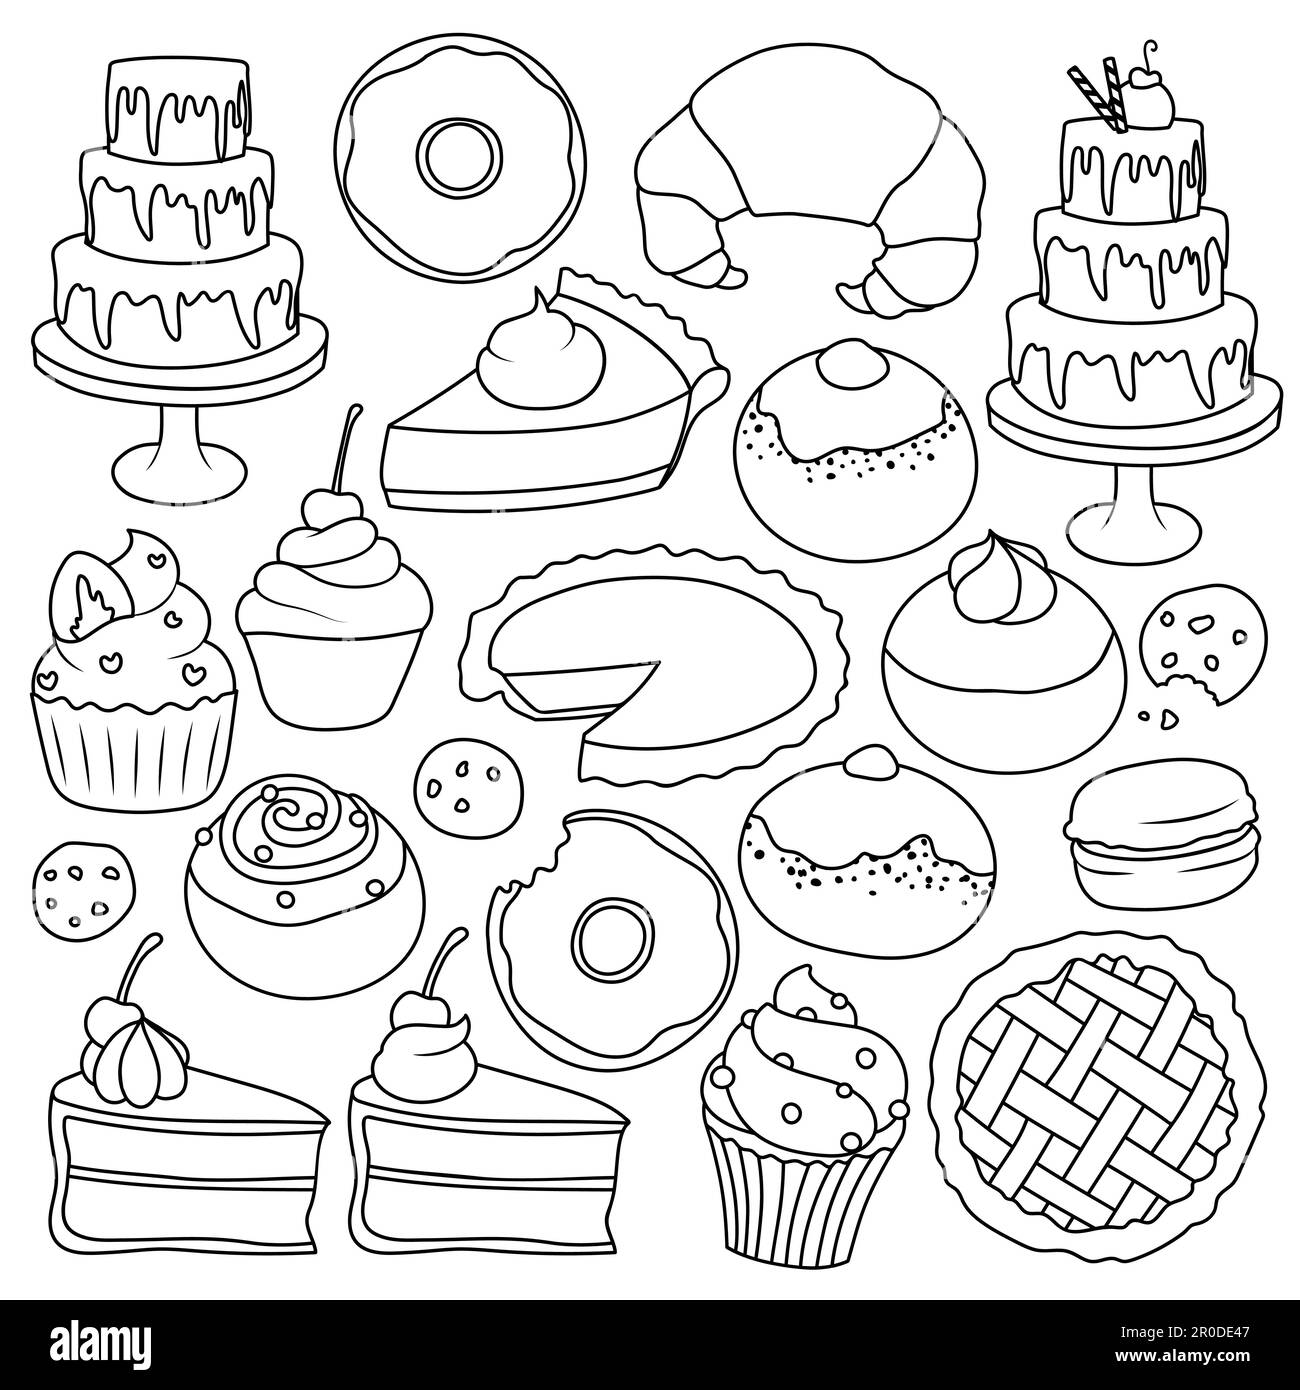 Collection of black and white cartoon illustrations of various desserts and treats. Isolated hand drawn vectors. Black outlines for coloring. Stock Vector